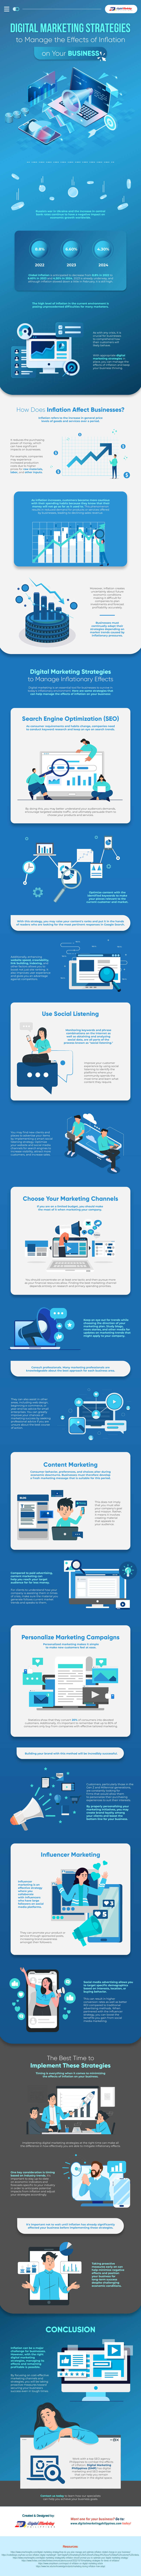 Digital Marketing Strategies to Manage the Effects of Inflation on Your Business Infographic